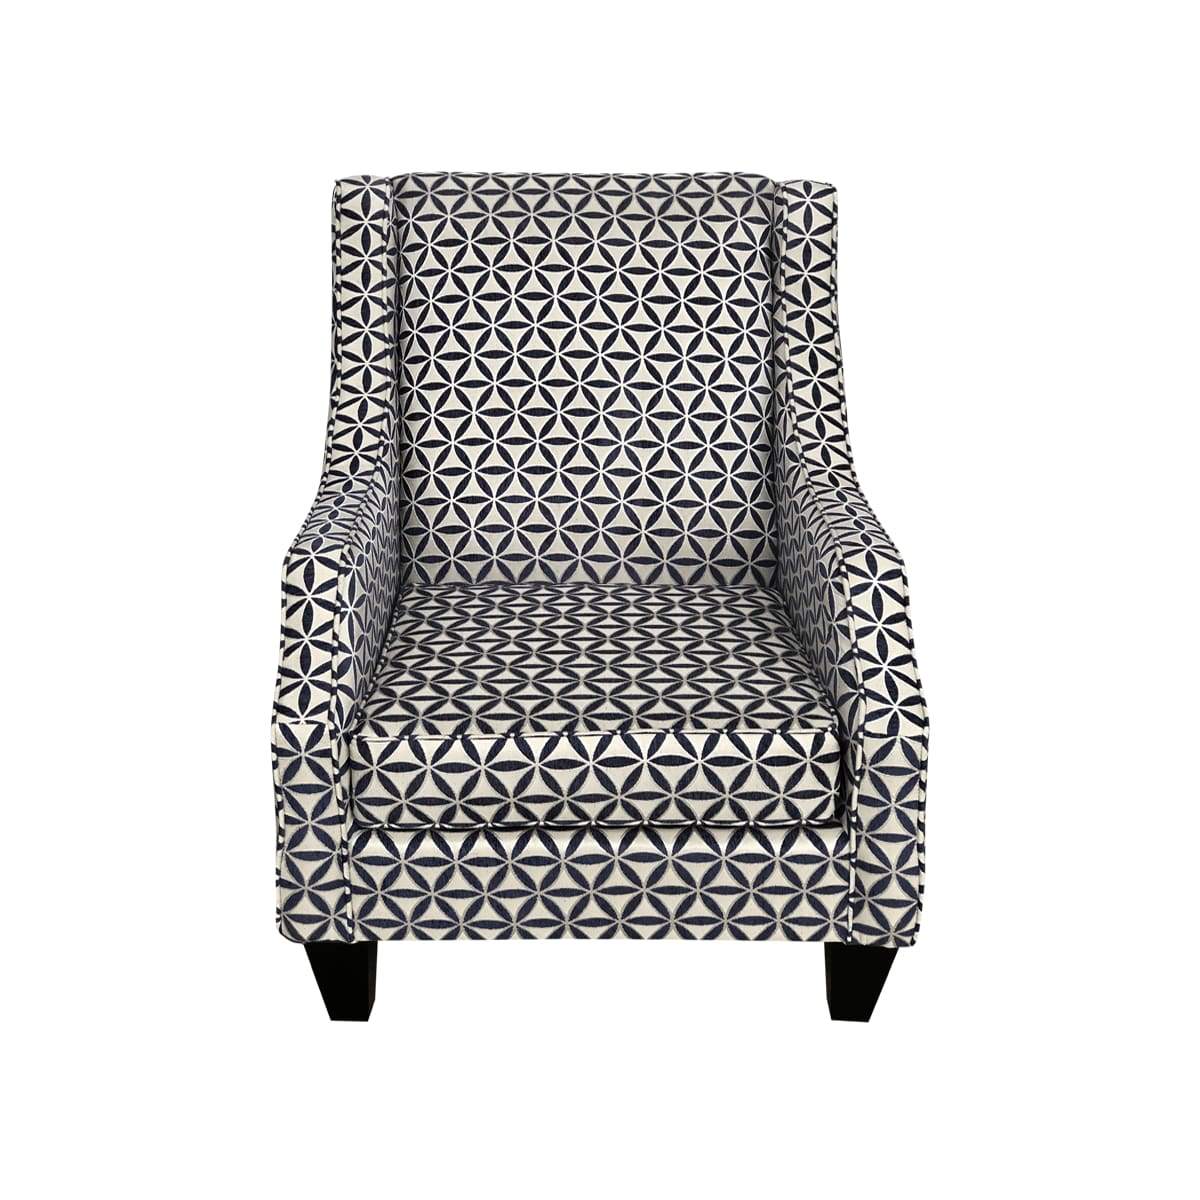 Hazel Chair - accent chairs